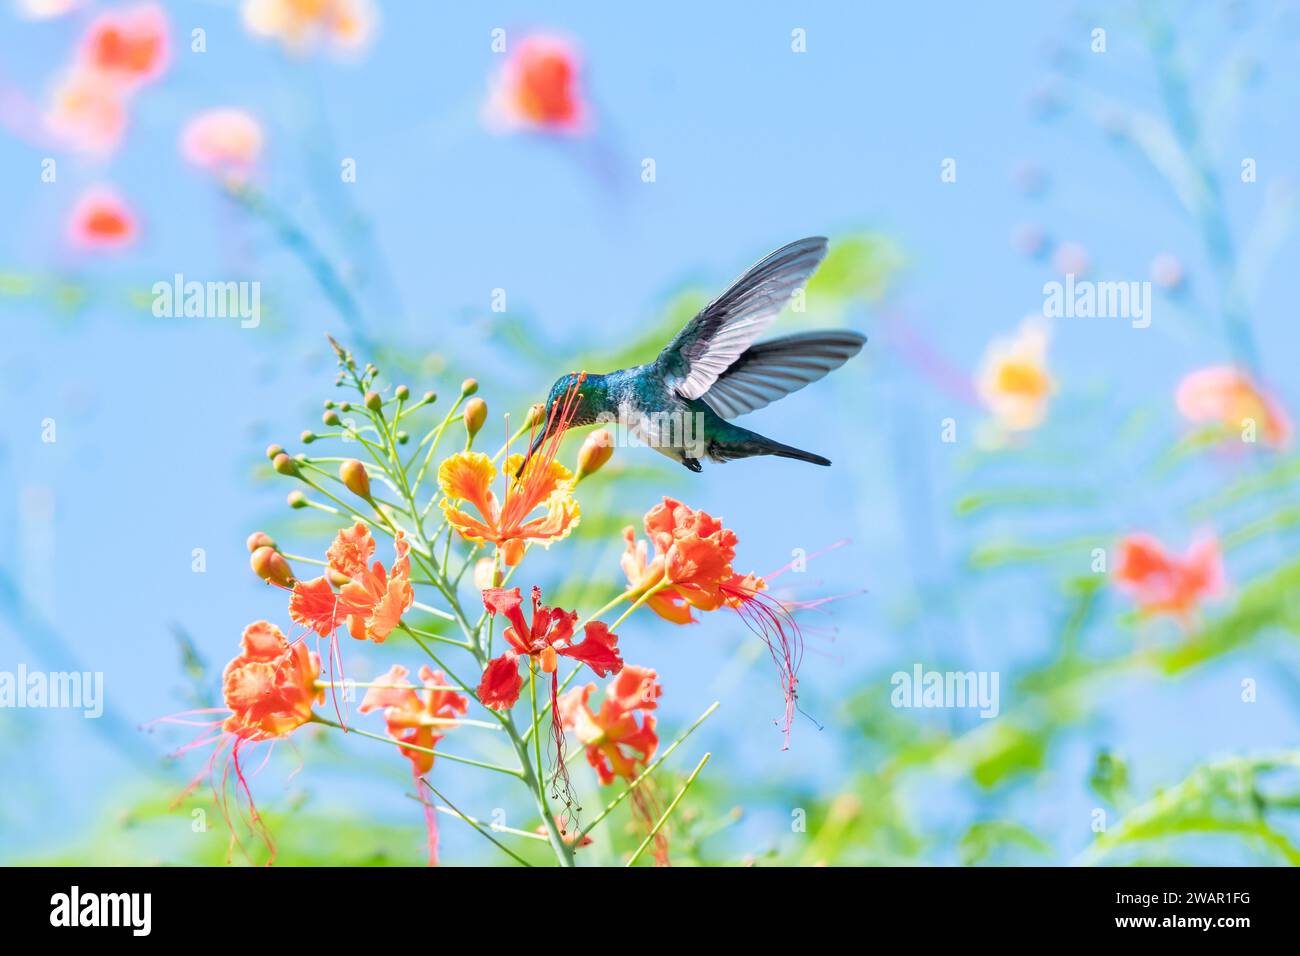 Blue-chinned Sapphire hummingbird, chlorestes notata, pollinating tropical Pride of Barbados flowers in the sunlight with blue sky Stock Photo